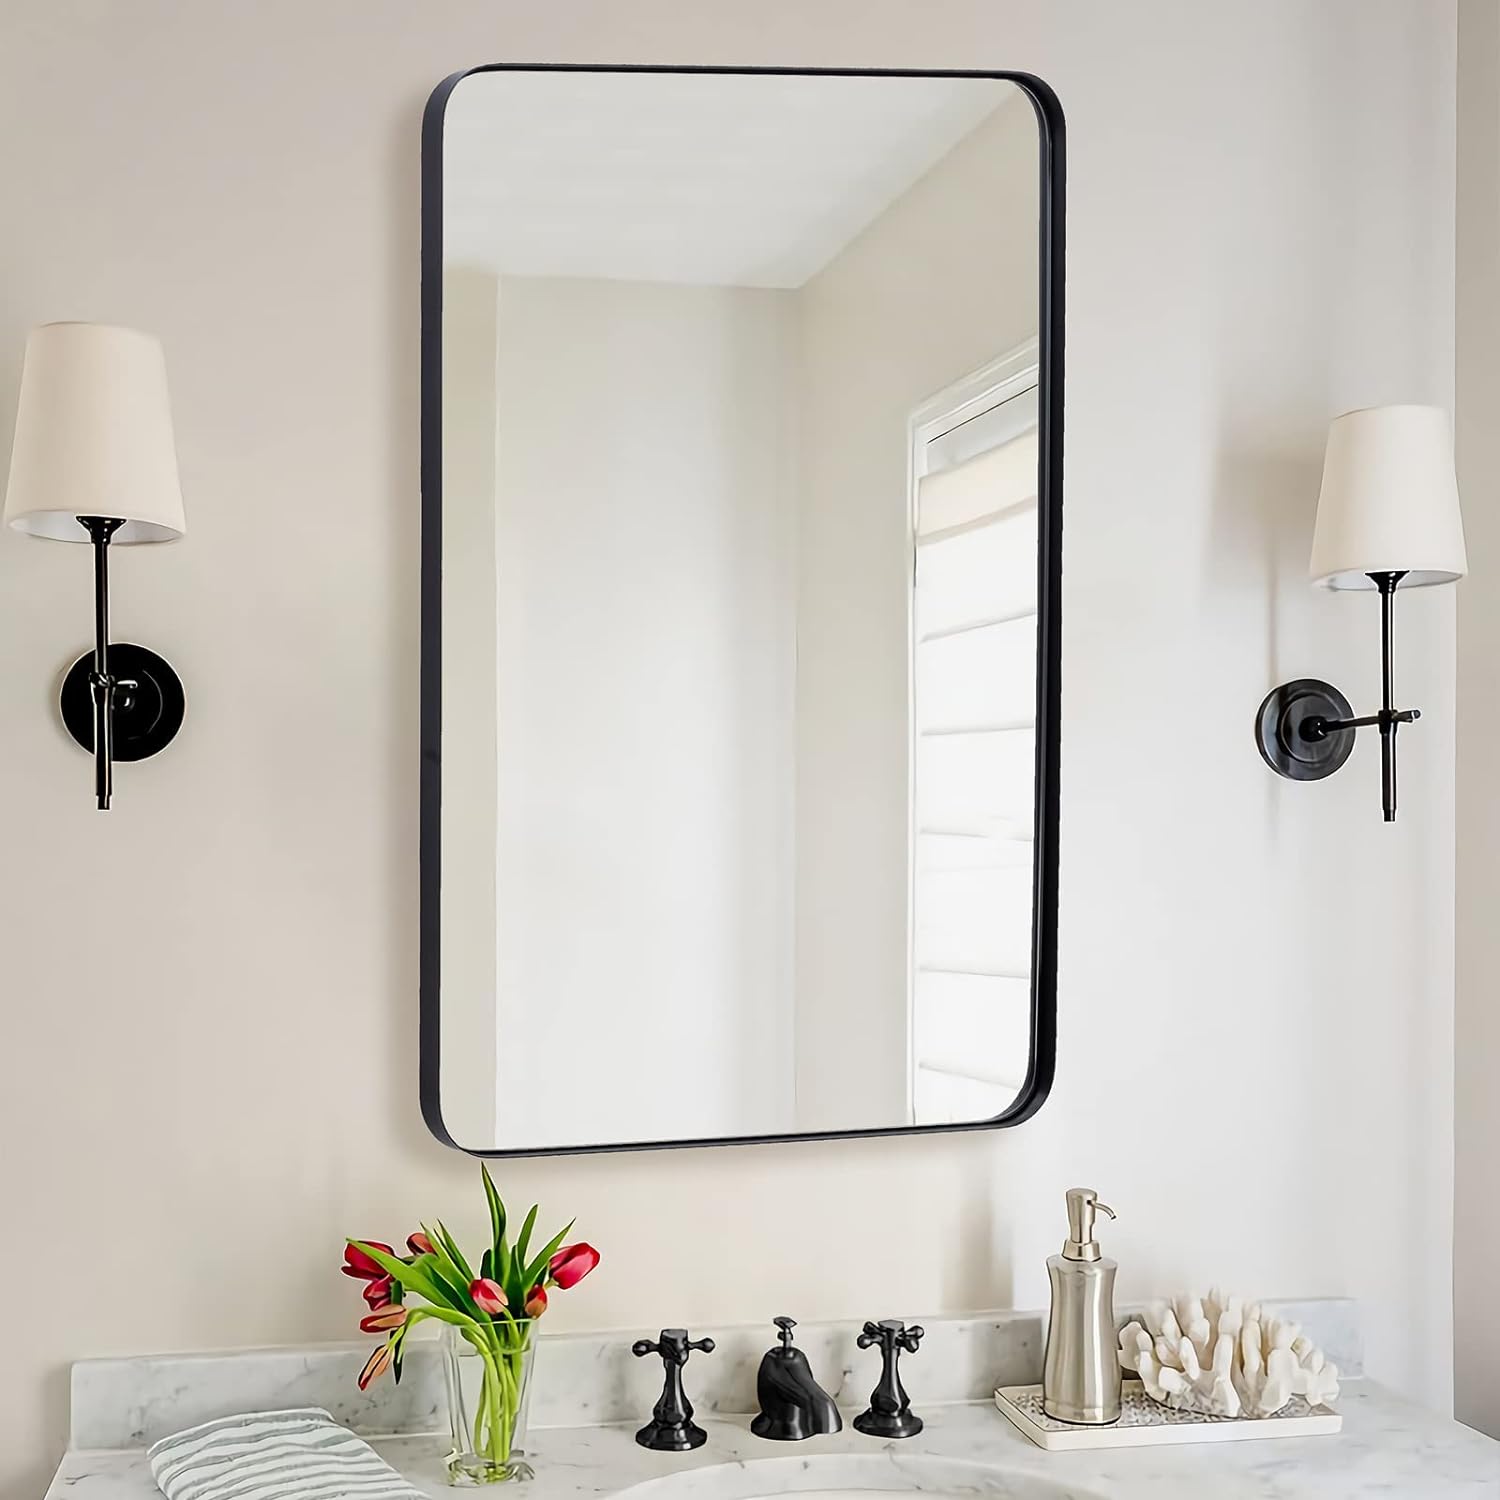 Great Choice Products Wall Mirror For Bathroom, 24X36 Inch Black Bathroom Mirror, Stainless Steel Metal Frame With Rounded Corner, Rectangle Glass …